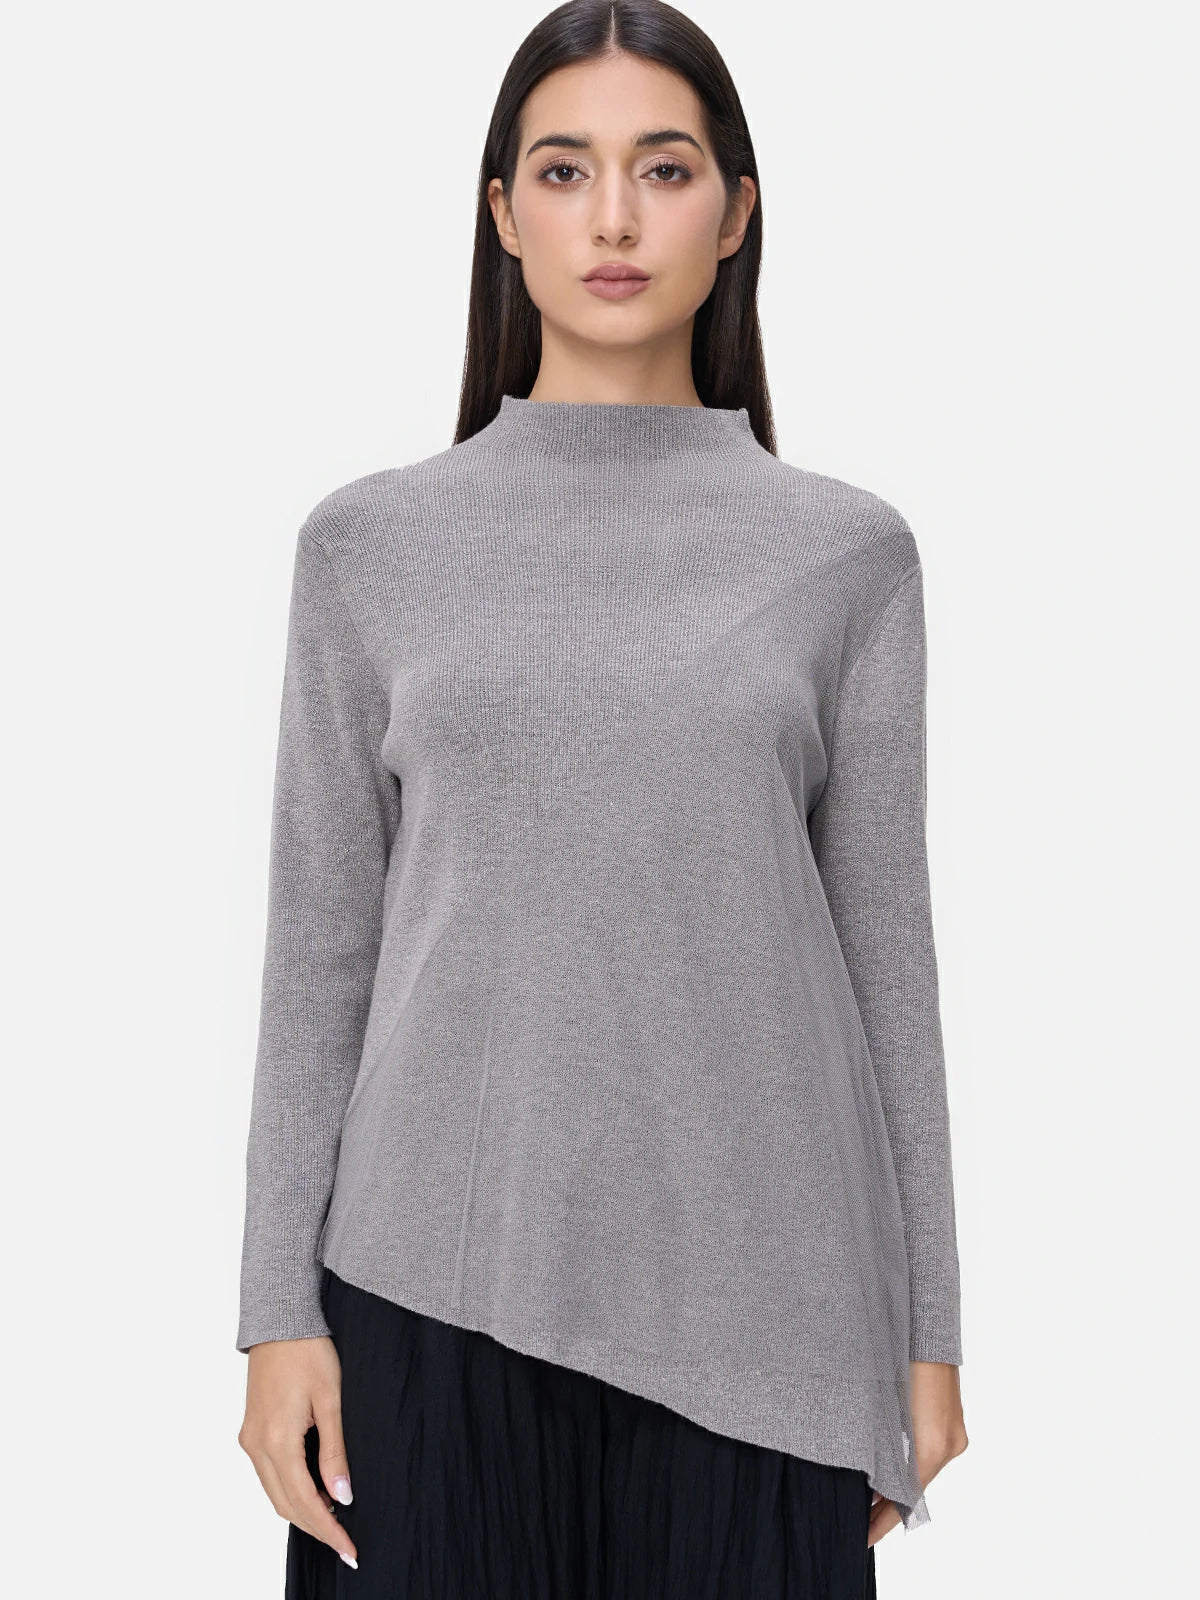 Fashionable gray semi-turtleneck sweater with asymmetric design and lace mesh, creating a unique look.